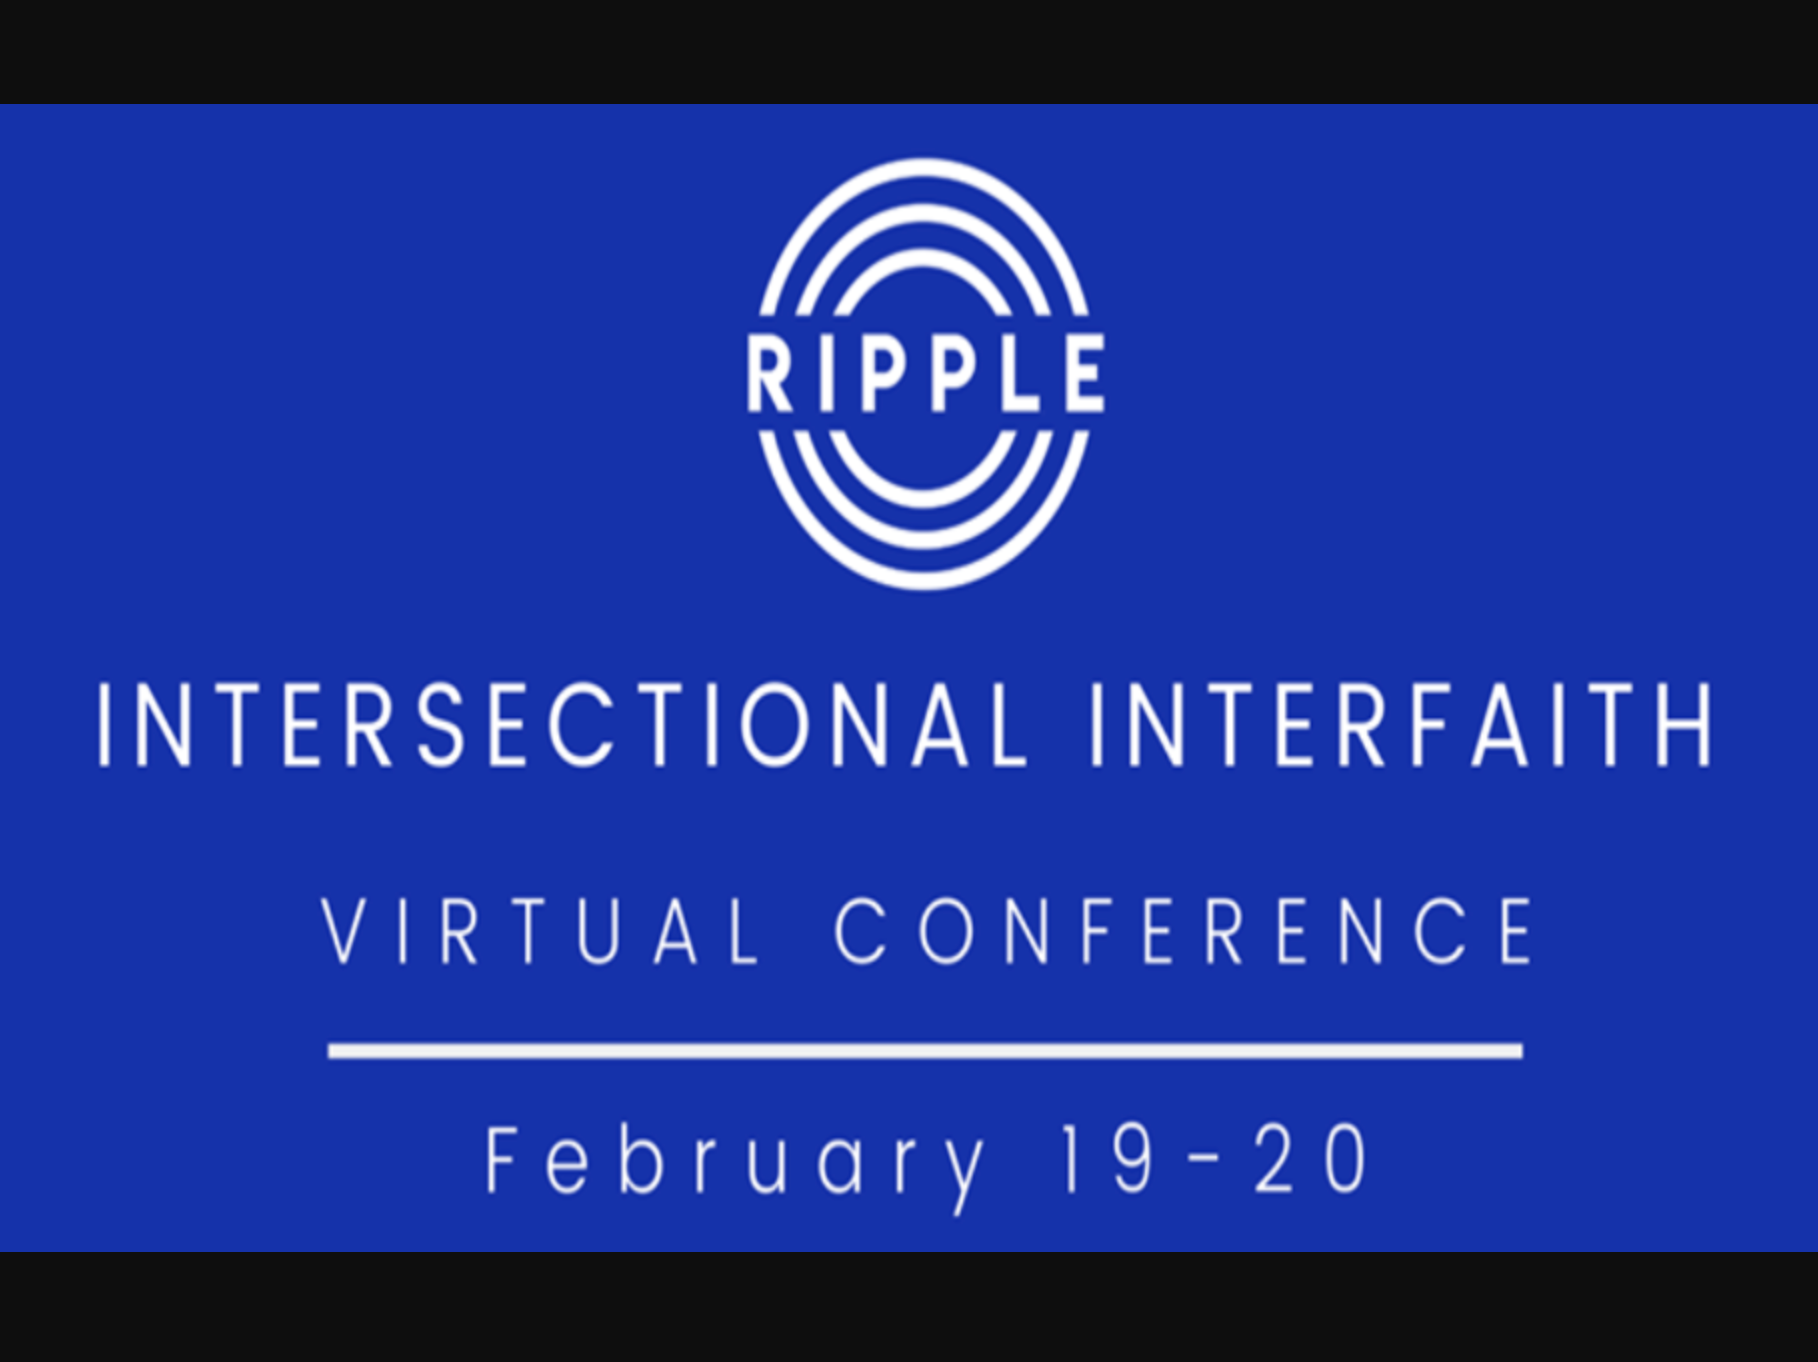 Annual Ripple Conference to highlight “Intersectional Interfaith” in